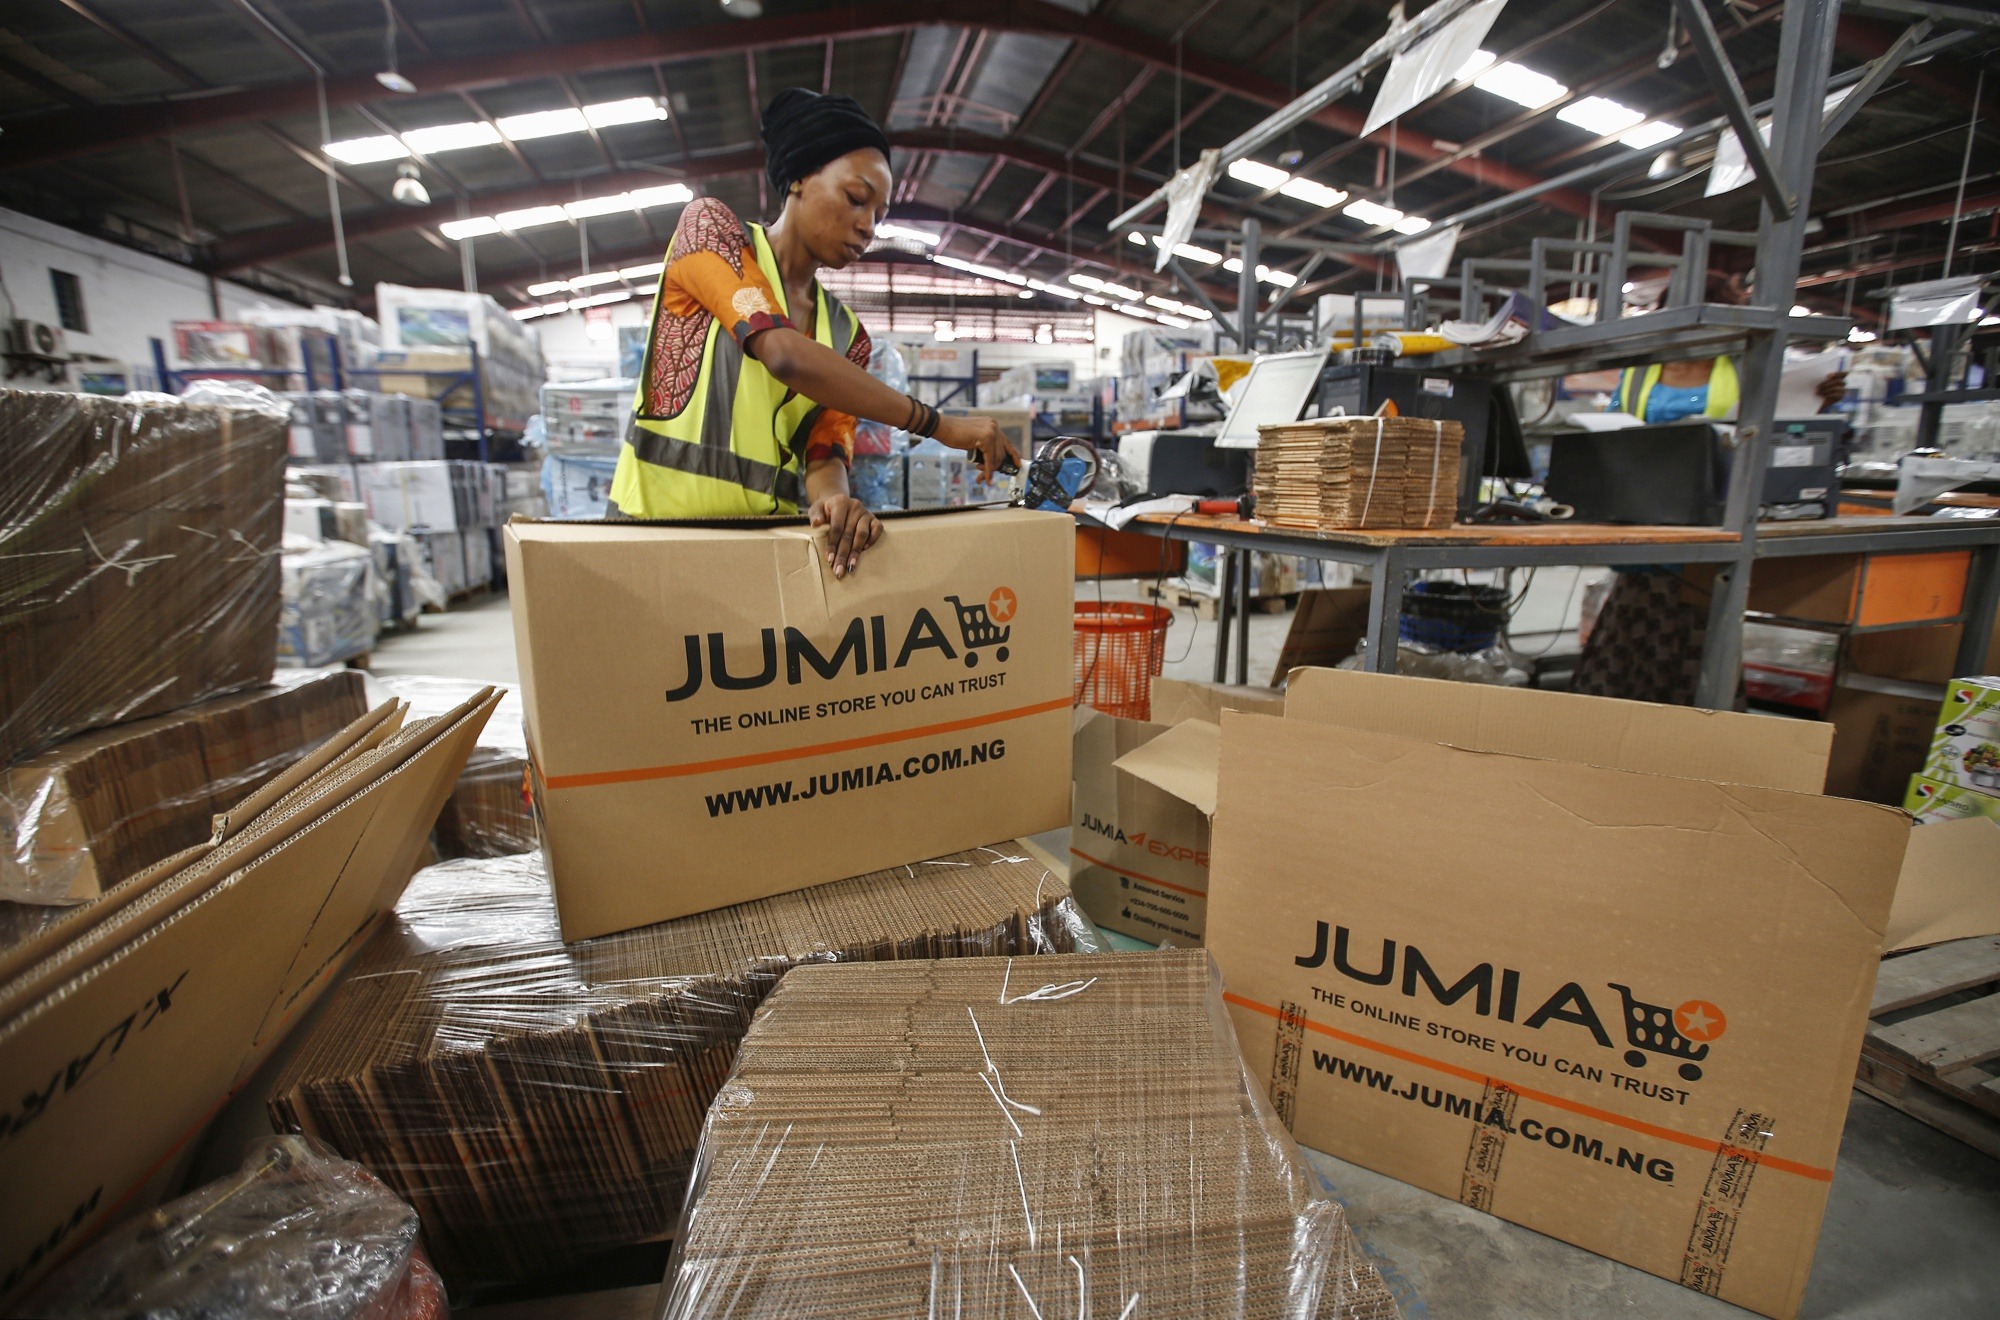 From Software Engineer to E-commerce Leader: Vinod Goel Takes Charge at Jumia East Africa